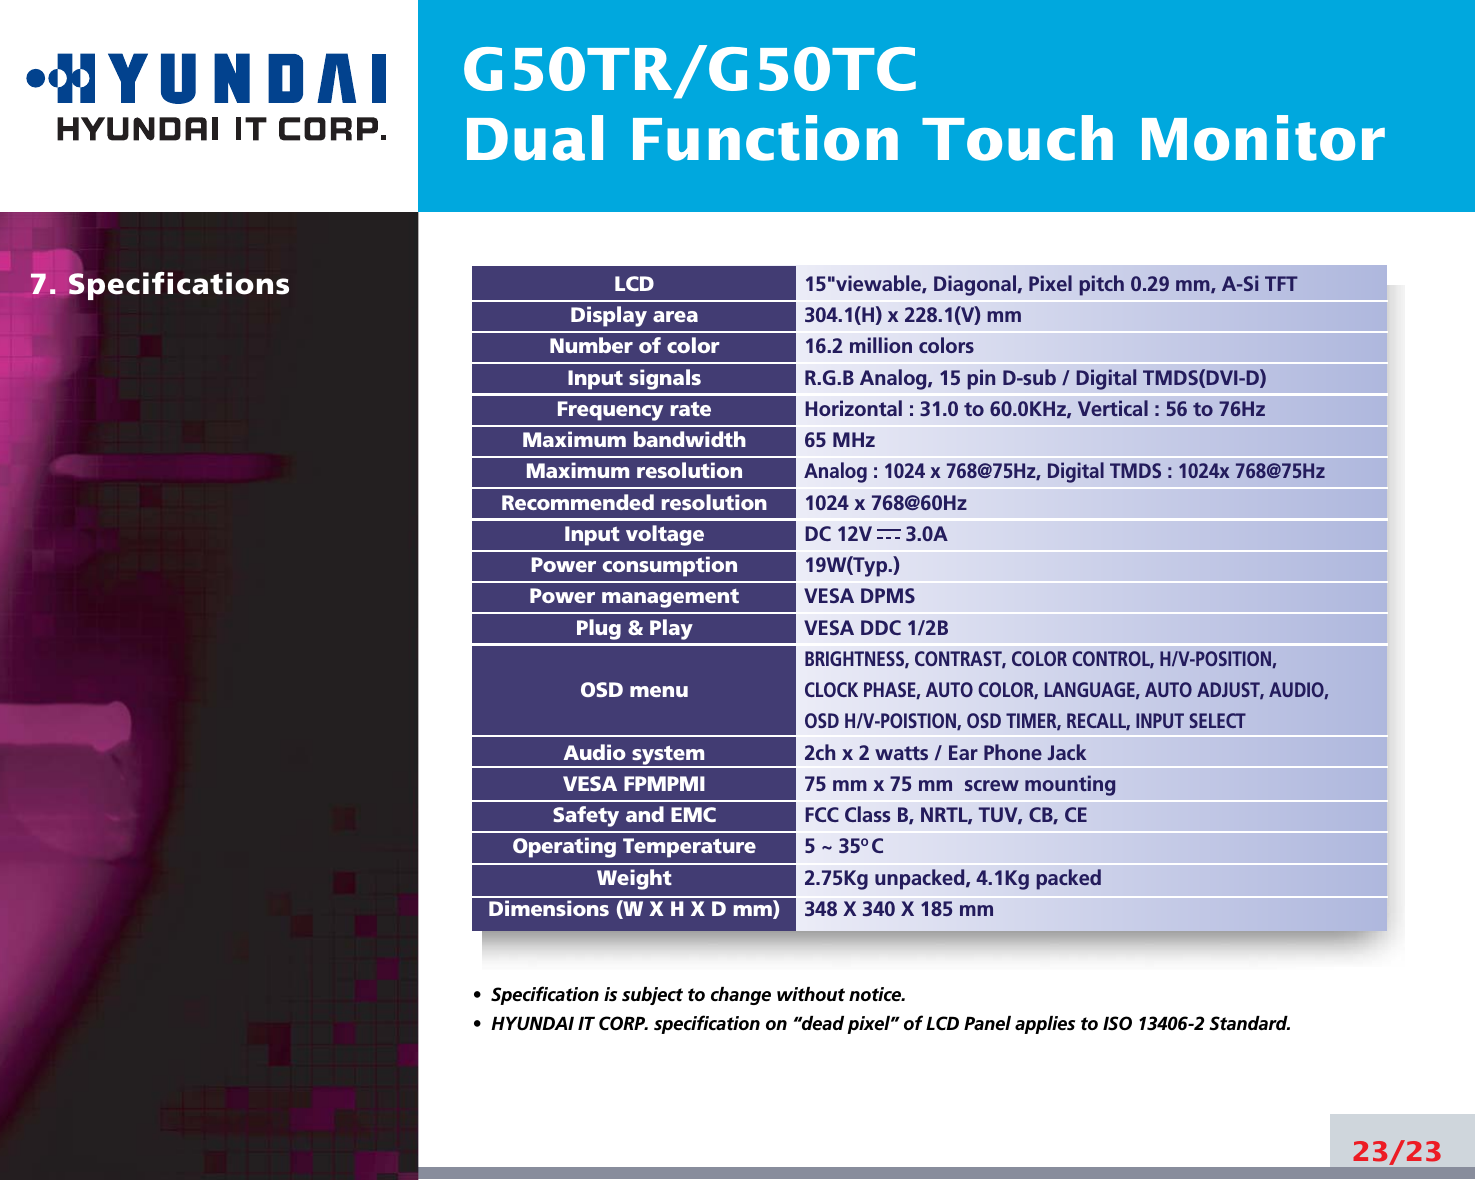 G50TR/G50TCDual Function Touch Monitor23/23LCDDisplay areaNumber of colorInput signalsFrequency rateMaximum bandwidthMaximum resolutionRecommended resolutionInput voltagePower consumptionPower managementPlug &amp; PlayOSD menuAudio systemVESA FPMPMISafety and EMCOperating TemperatureWeightDimensions (W X H X D mm)•  Specification is subject to change without notice.•  HYUNDAI IT CORP. specification on “dead pixel” of LCD Panel applies to ISO 13406-2 Standard.7. Specifications15&quot;viewable, Diagonal, Pixel pitch 0.29 mm, A-Si TFT304.1(H) x 228.1(V) mm16.2 million colorsR.G.B Analog, 15 pin D-sub / Digital TMDS(DVI-D)Horizontal : 31.0 to 60.0KHz, Vertical : 56 to 76Hz65 MHzAnalog : 1024 x 768@75Hz, Digital TMDS : 1024x 768@75Hz1024 x 768@60HzDC 12V      3.0A 19W(Typ.)VESA DPMSVESA DDC 1/2BBRIGHTNESS, CONTRAST, COLOR CONTROL, H/V-POSITION, CLOCK PHASE, AUTO COLOR, LANGUAGE, AUTO ADJUST, AUDIO,   OSD H/V-POISTION, OSD TIMER, RECALL, INPUT SELECT2ch x 2 watts / Ear Phone Jack75 mm x 75 mm  screw mountingFCC Class B, NRTL, TUV, CB, CE5 ~ 35O C2.75Kg unpacked, 4.1Kg packed348 X 340 X 185 mm